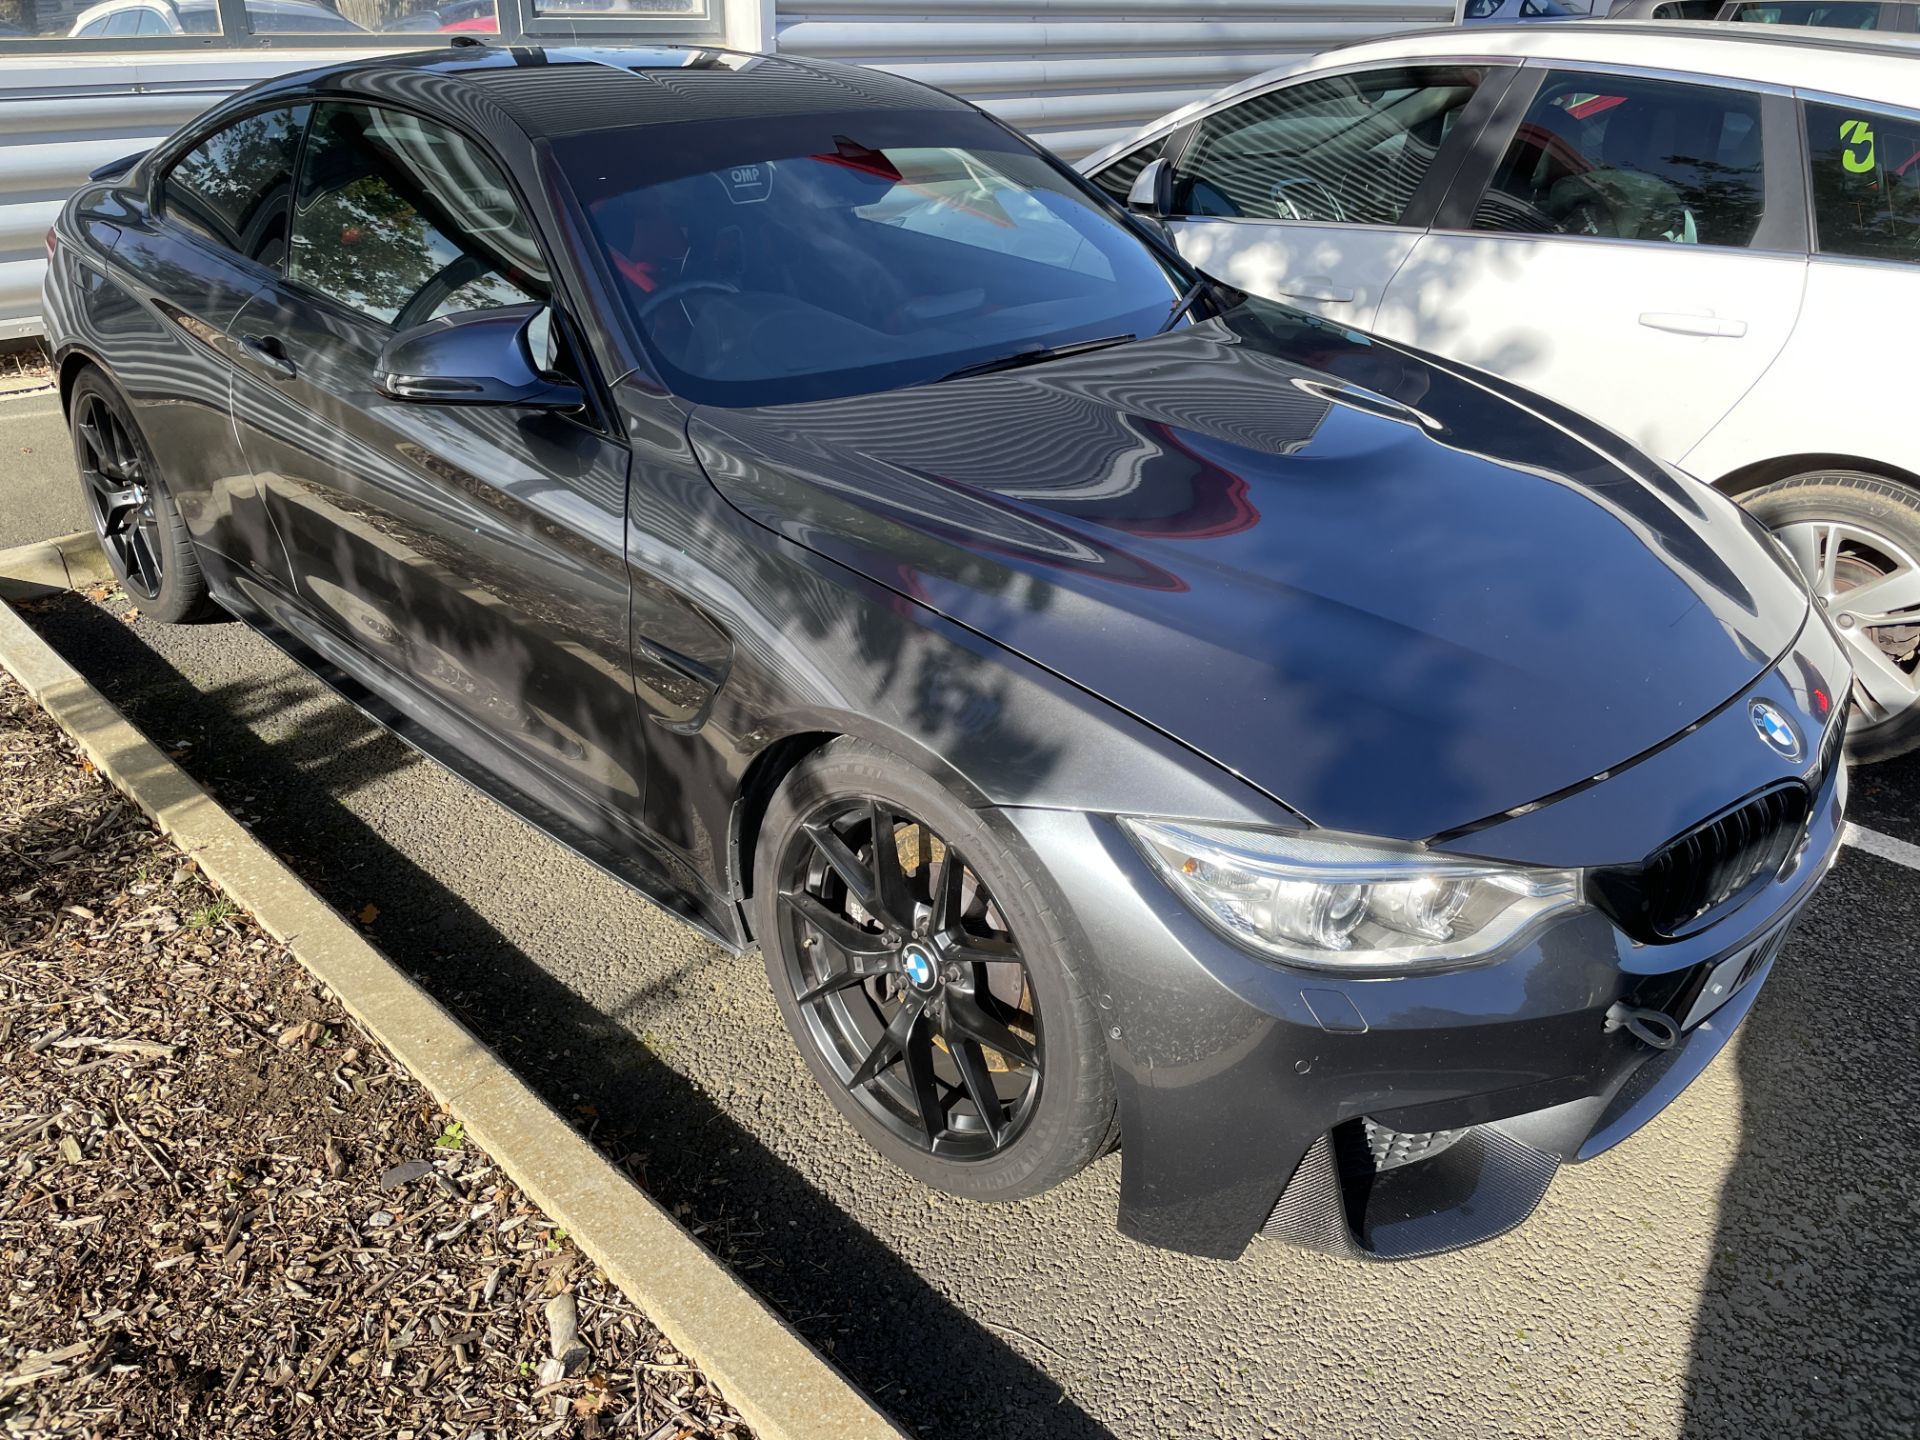 BMW M4 S-A 3.0 Petrol Automatic Two Door Coupe Converted Into Track CarRegistration Number N11 YOB - Image 3 of 16